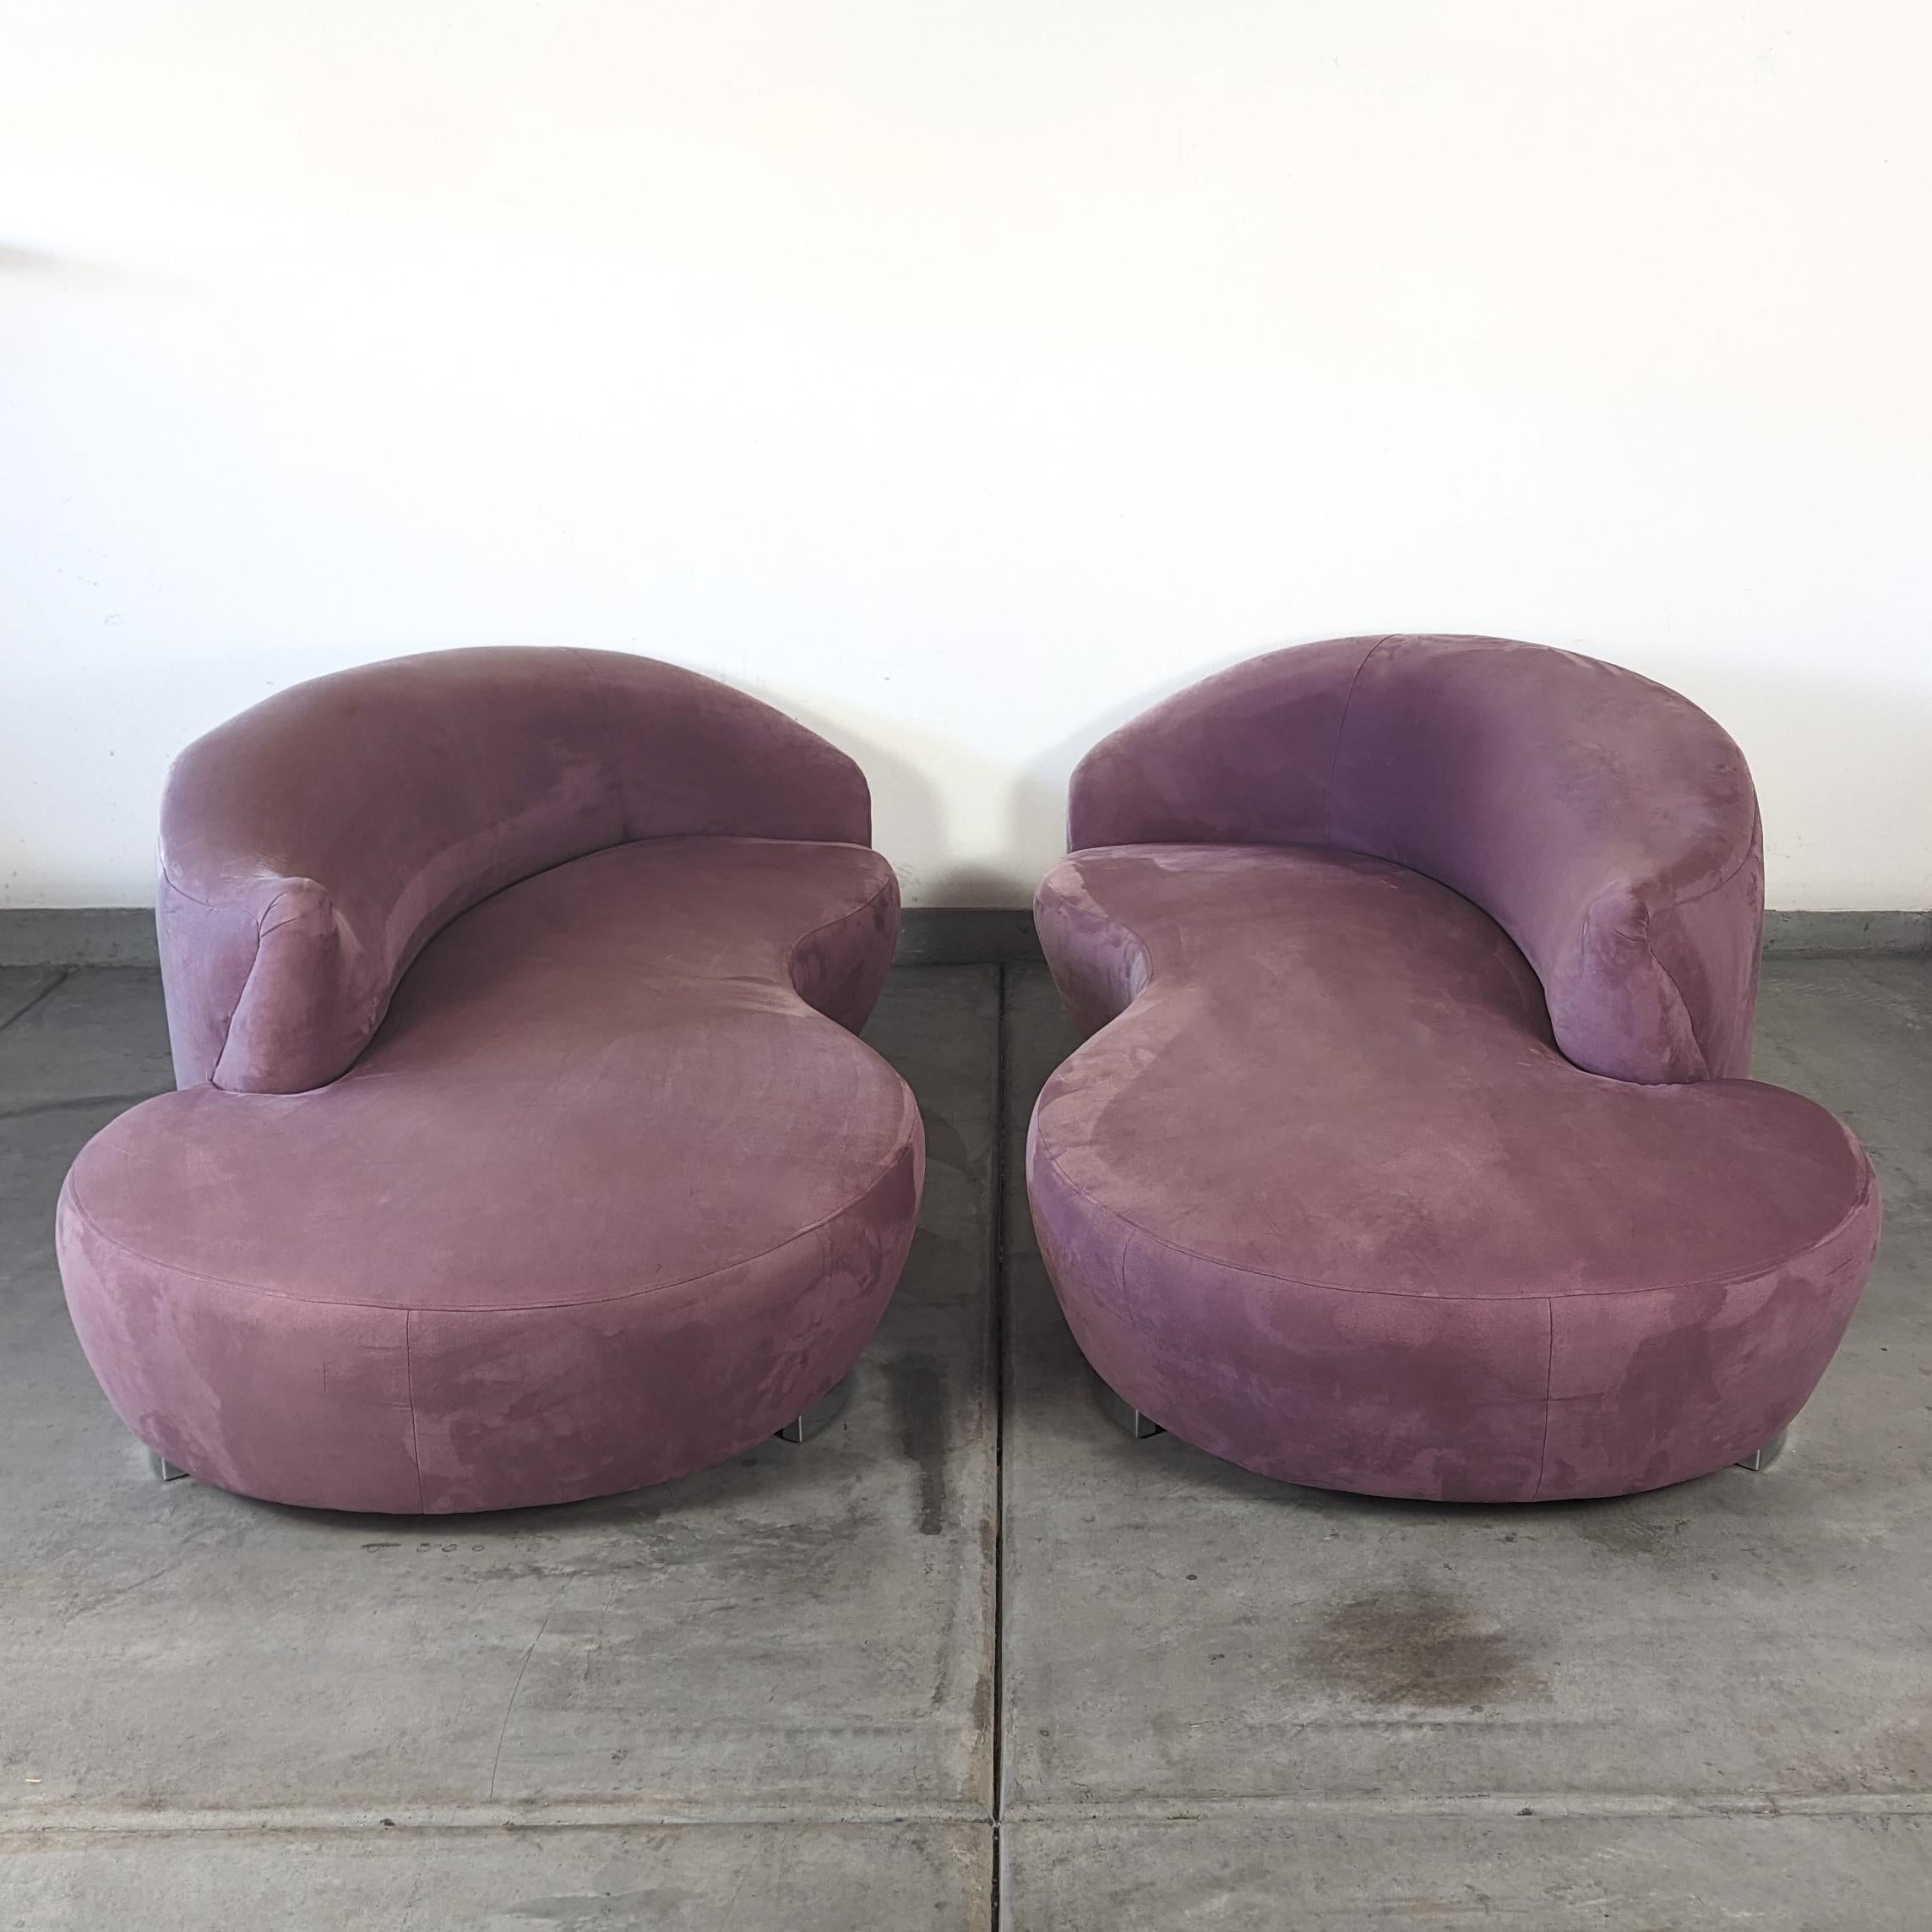 Nestled within the realm of timeless elegance and whimsical charm, this exquisite pair of vintage postmodern cloud sofas beckons to be the centerpiece of your living space. Crafted in the 1990s, these sofas exude the playful yet sophisticated spirit